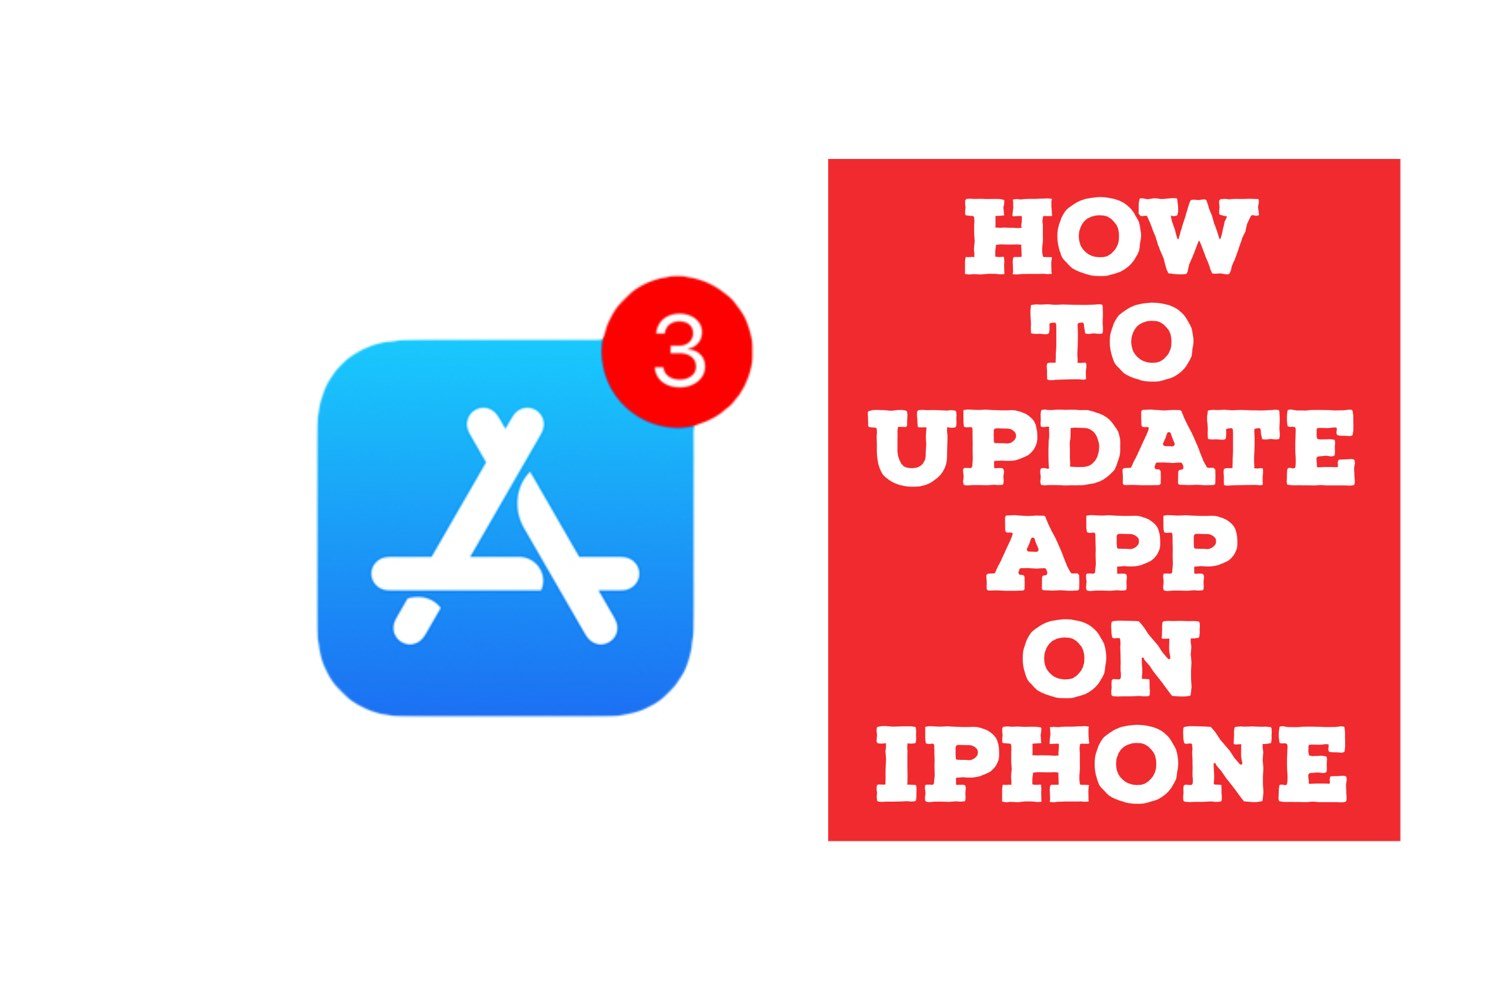 How to Update Apps on iPhone